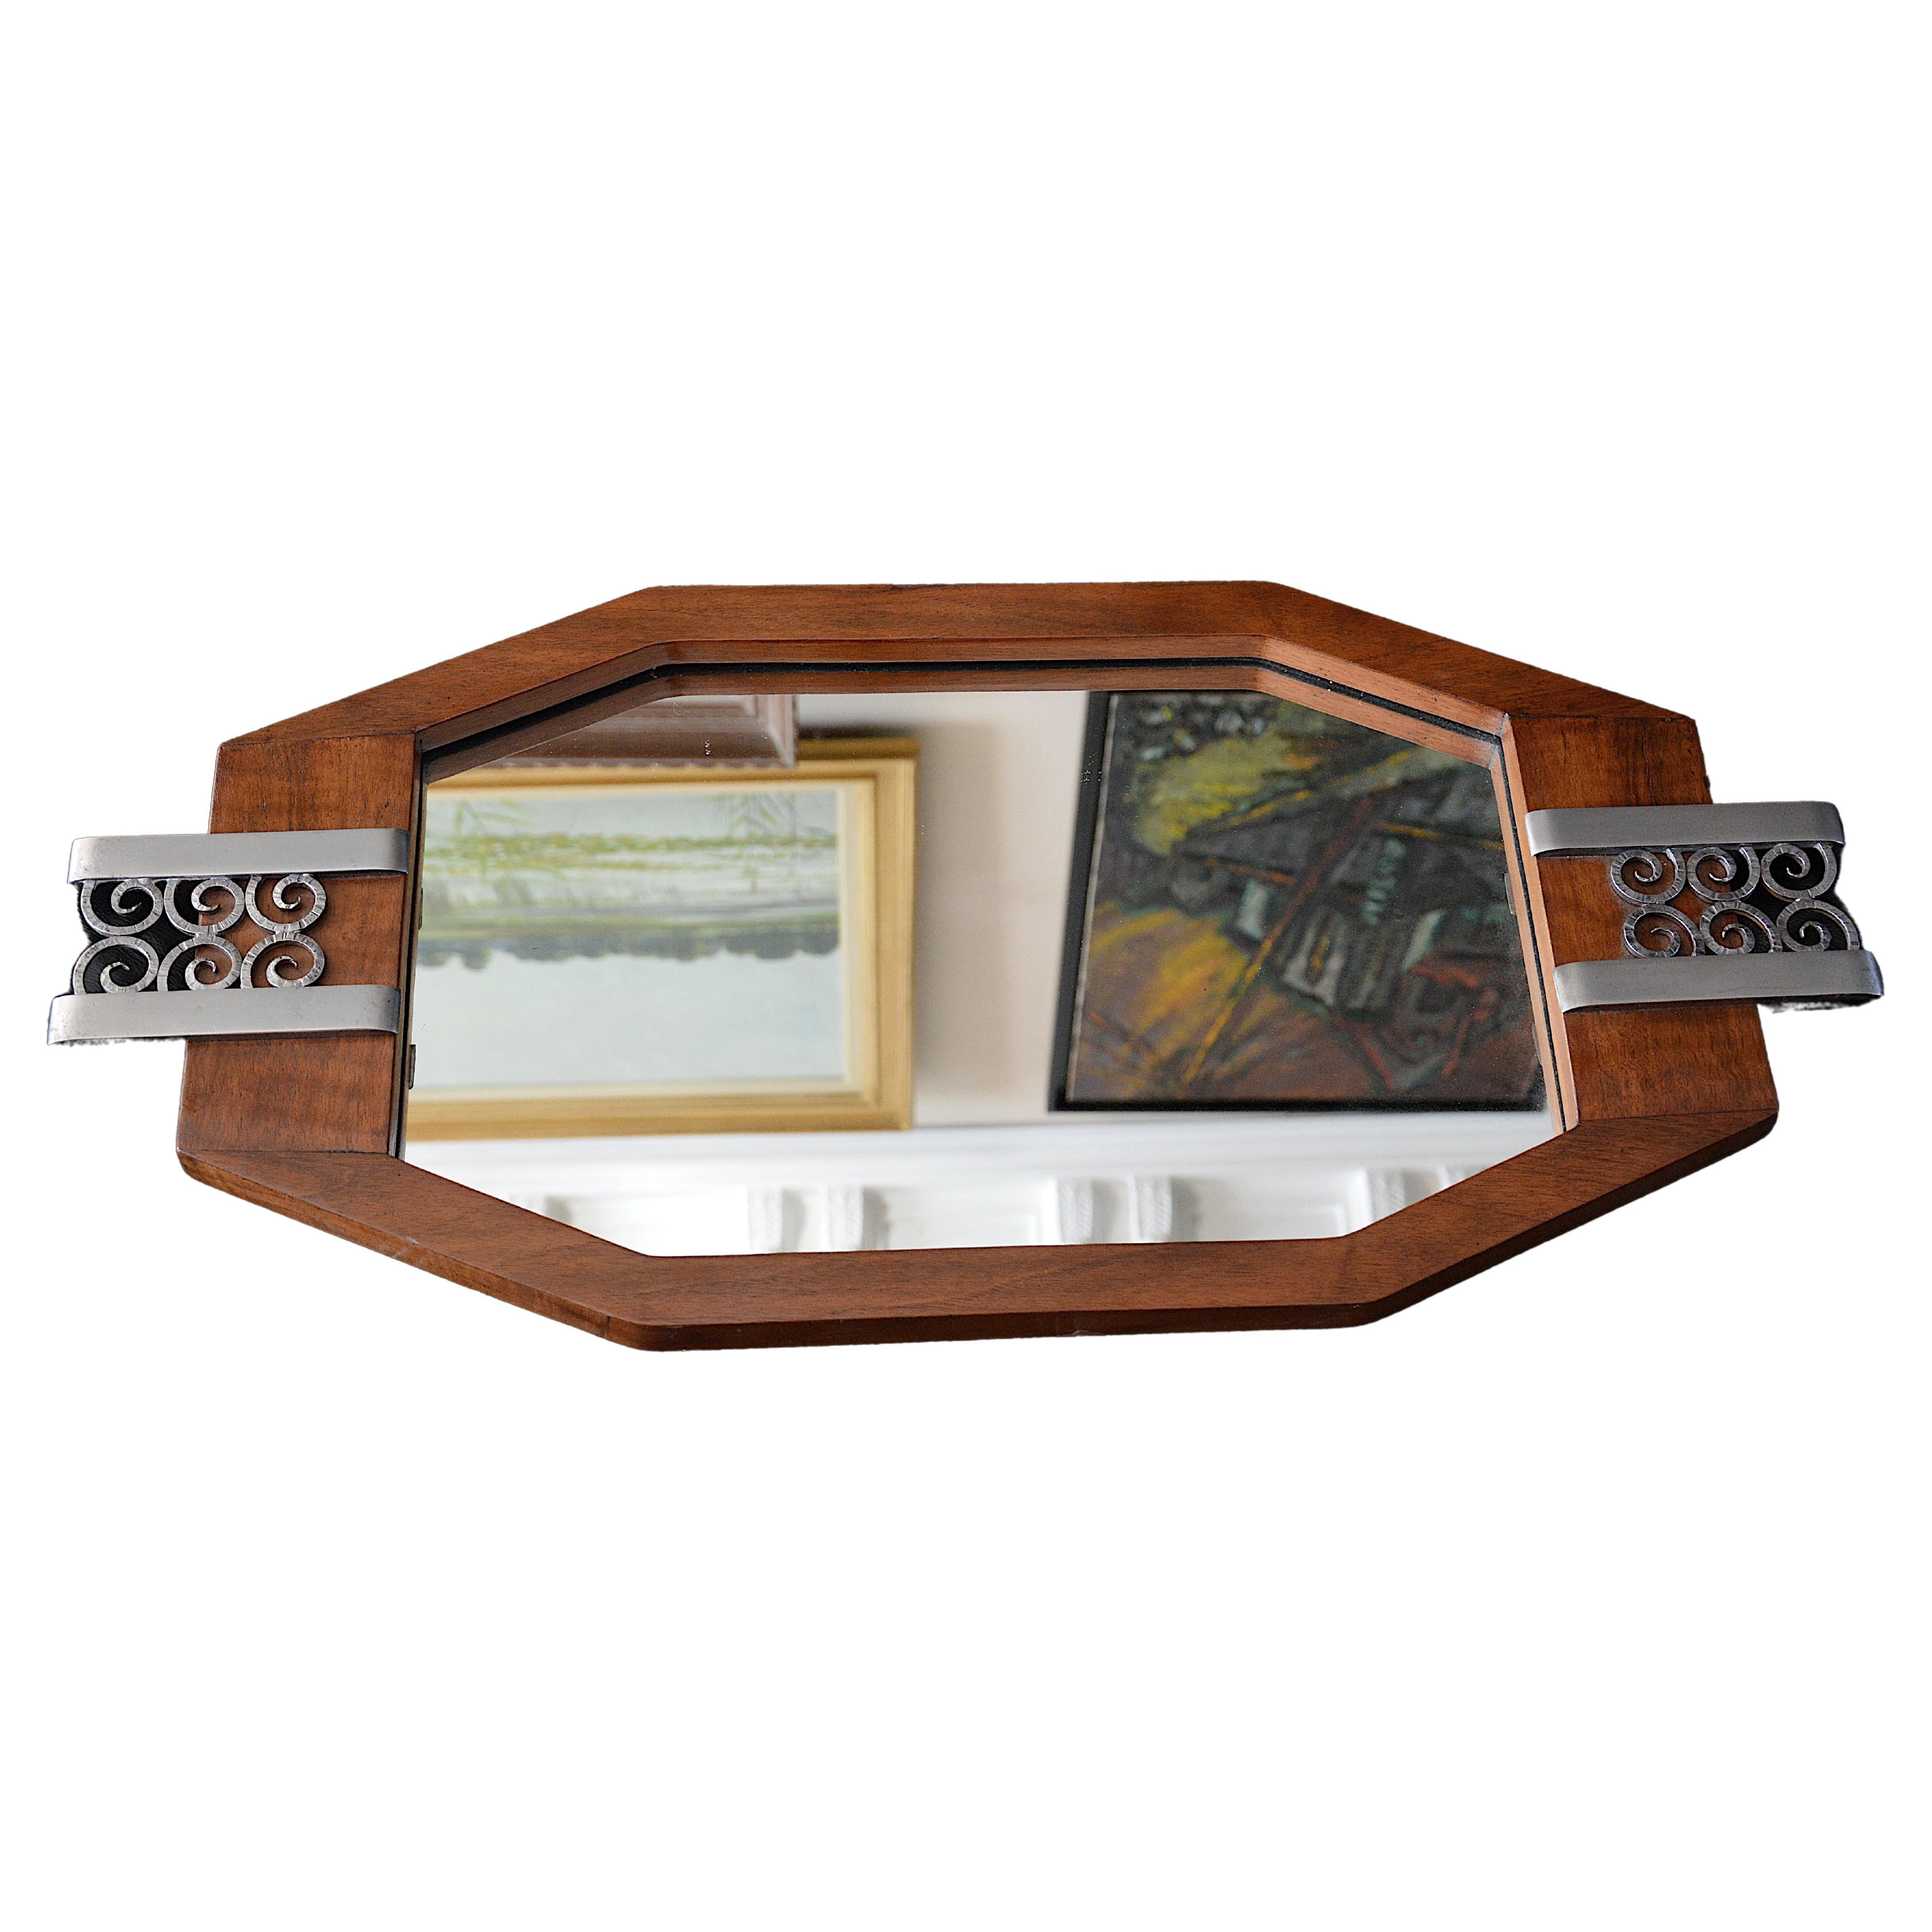 French Art Deco tray, France, 1930. Walnut, wrought iron and mirror. Measures: Width 18.1